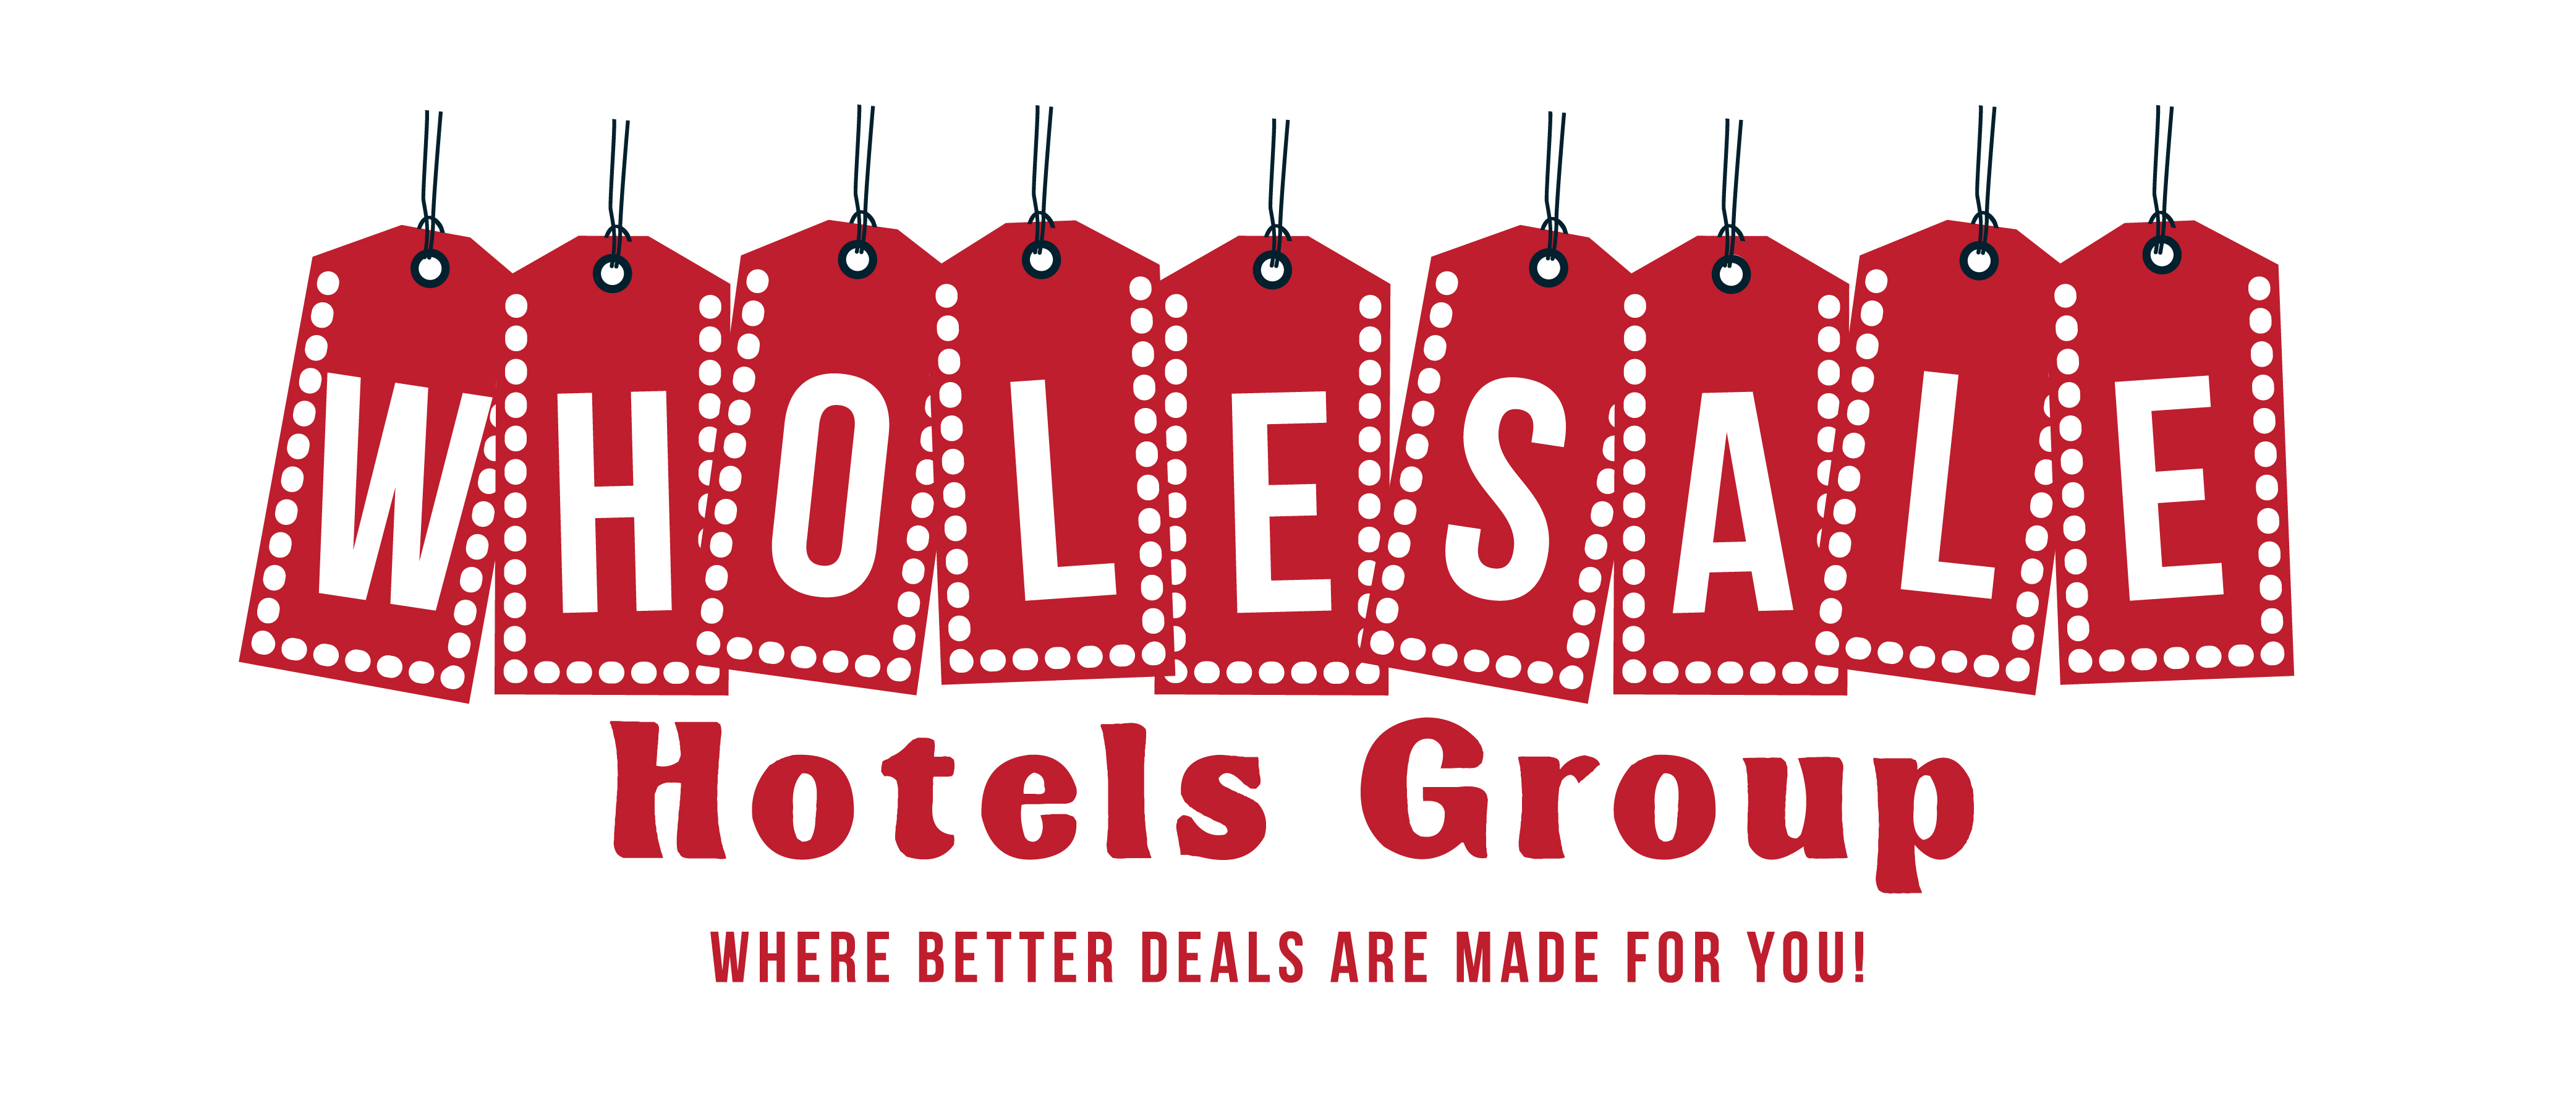 One of the best Hotel BedBanks: Wholesale Hotels Group